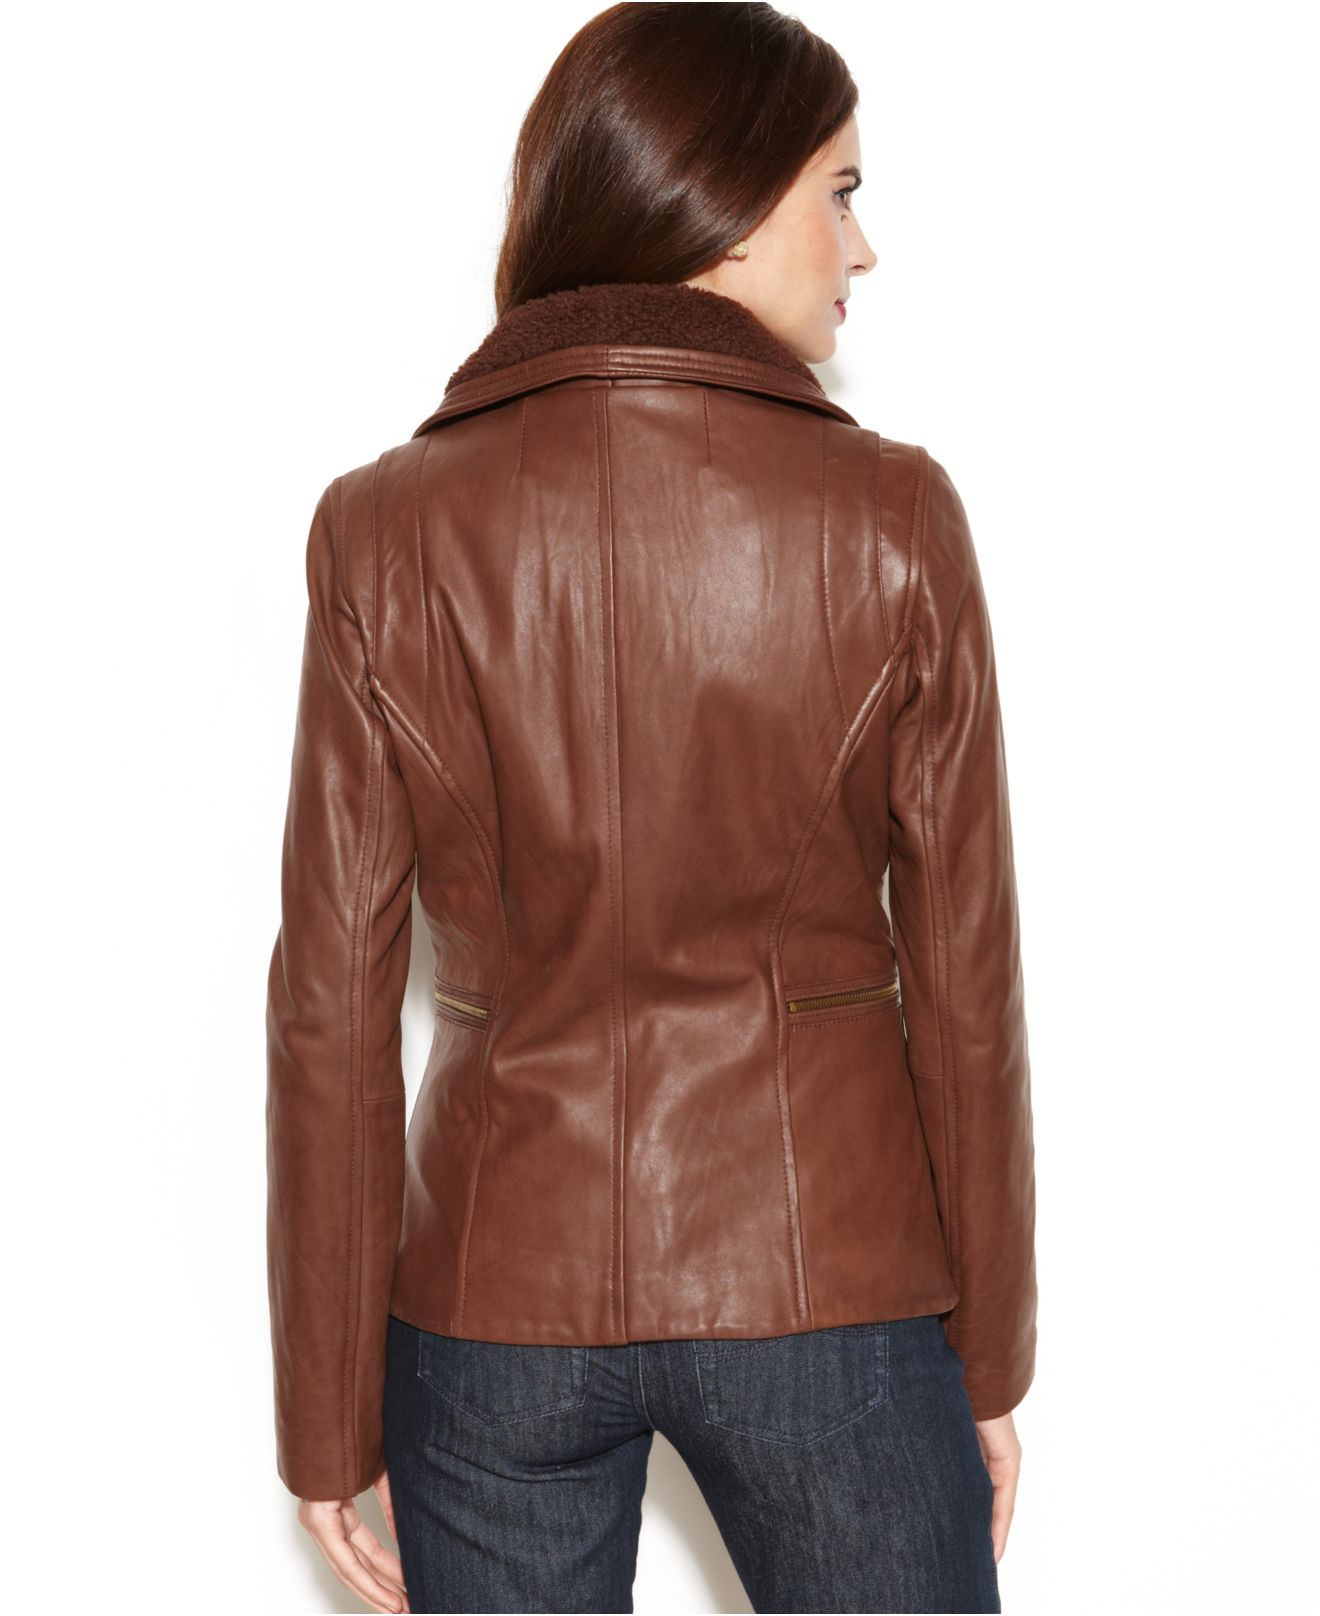 Lyst - Anne Klein Leather Faux-Fur-Collar Bomber Jacket in Brown